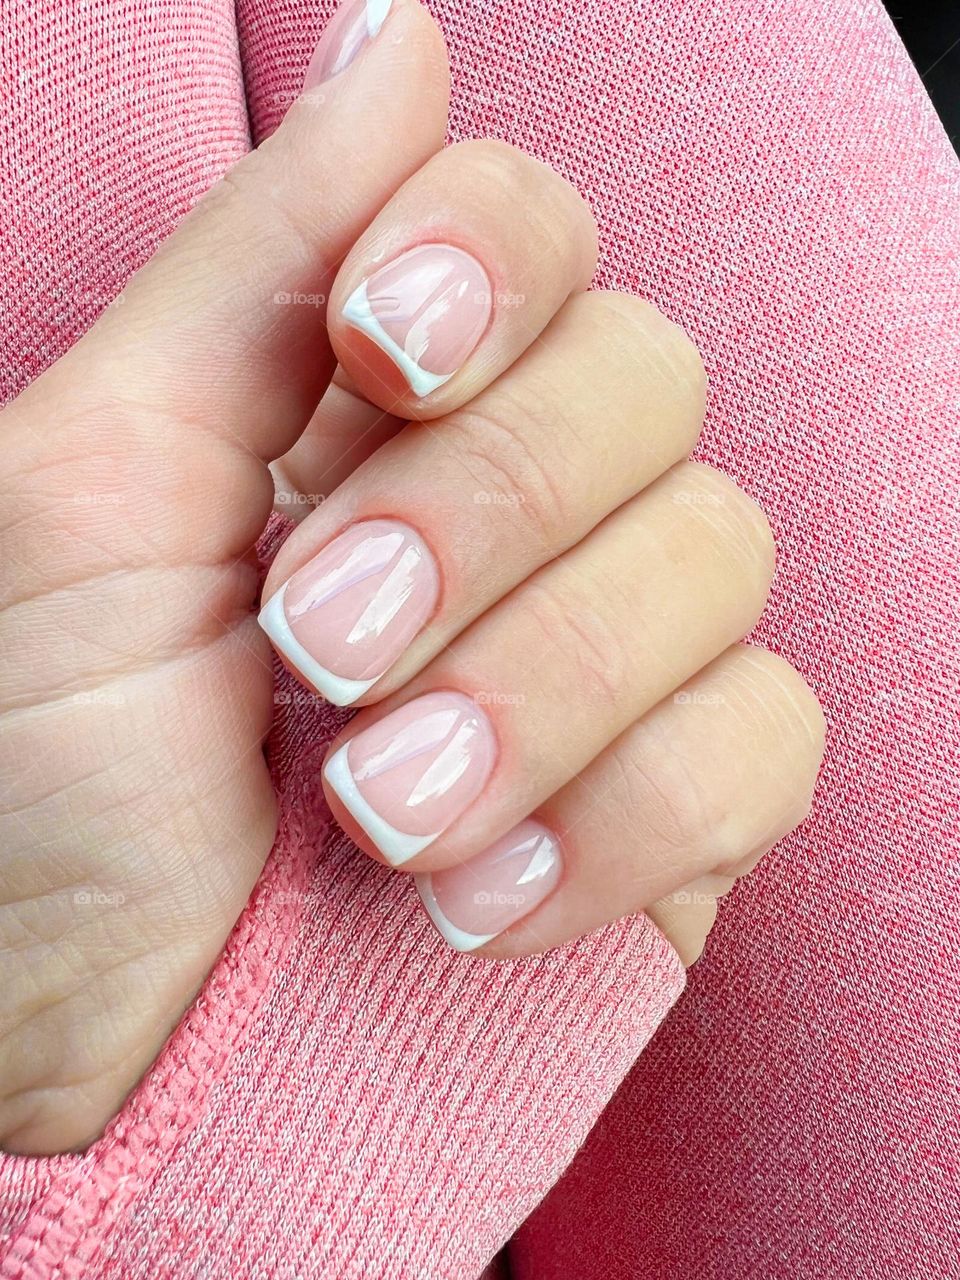 pink manicure on hands